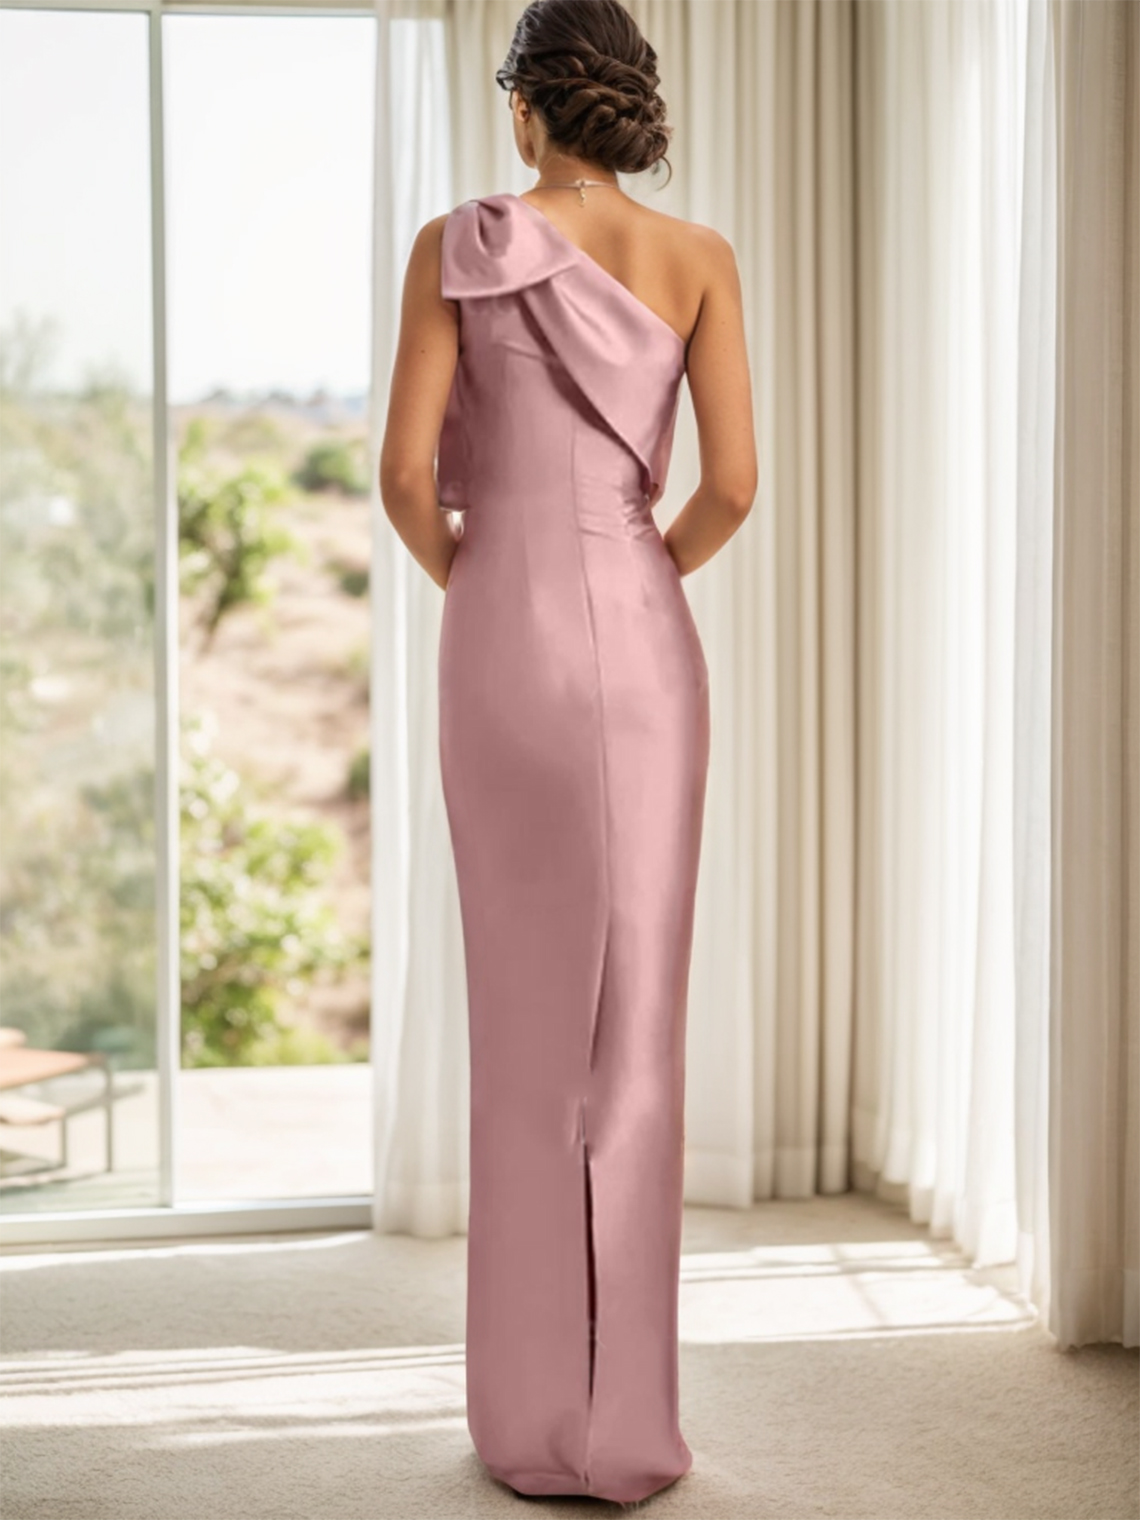 Sheath/Column One-Shoulder Satin With Bow(s) Bridesmaid Dresses